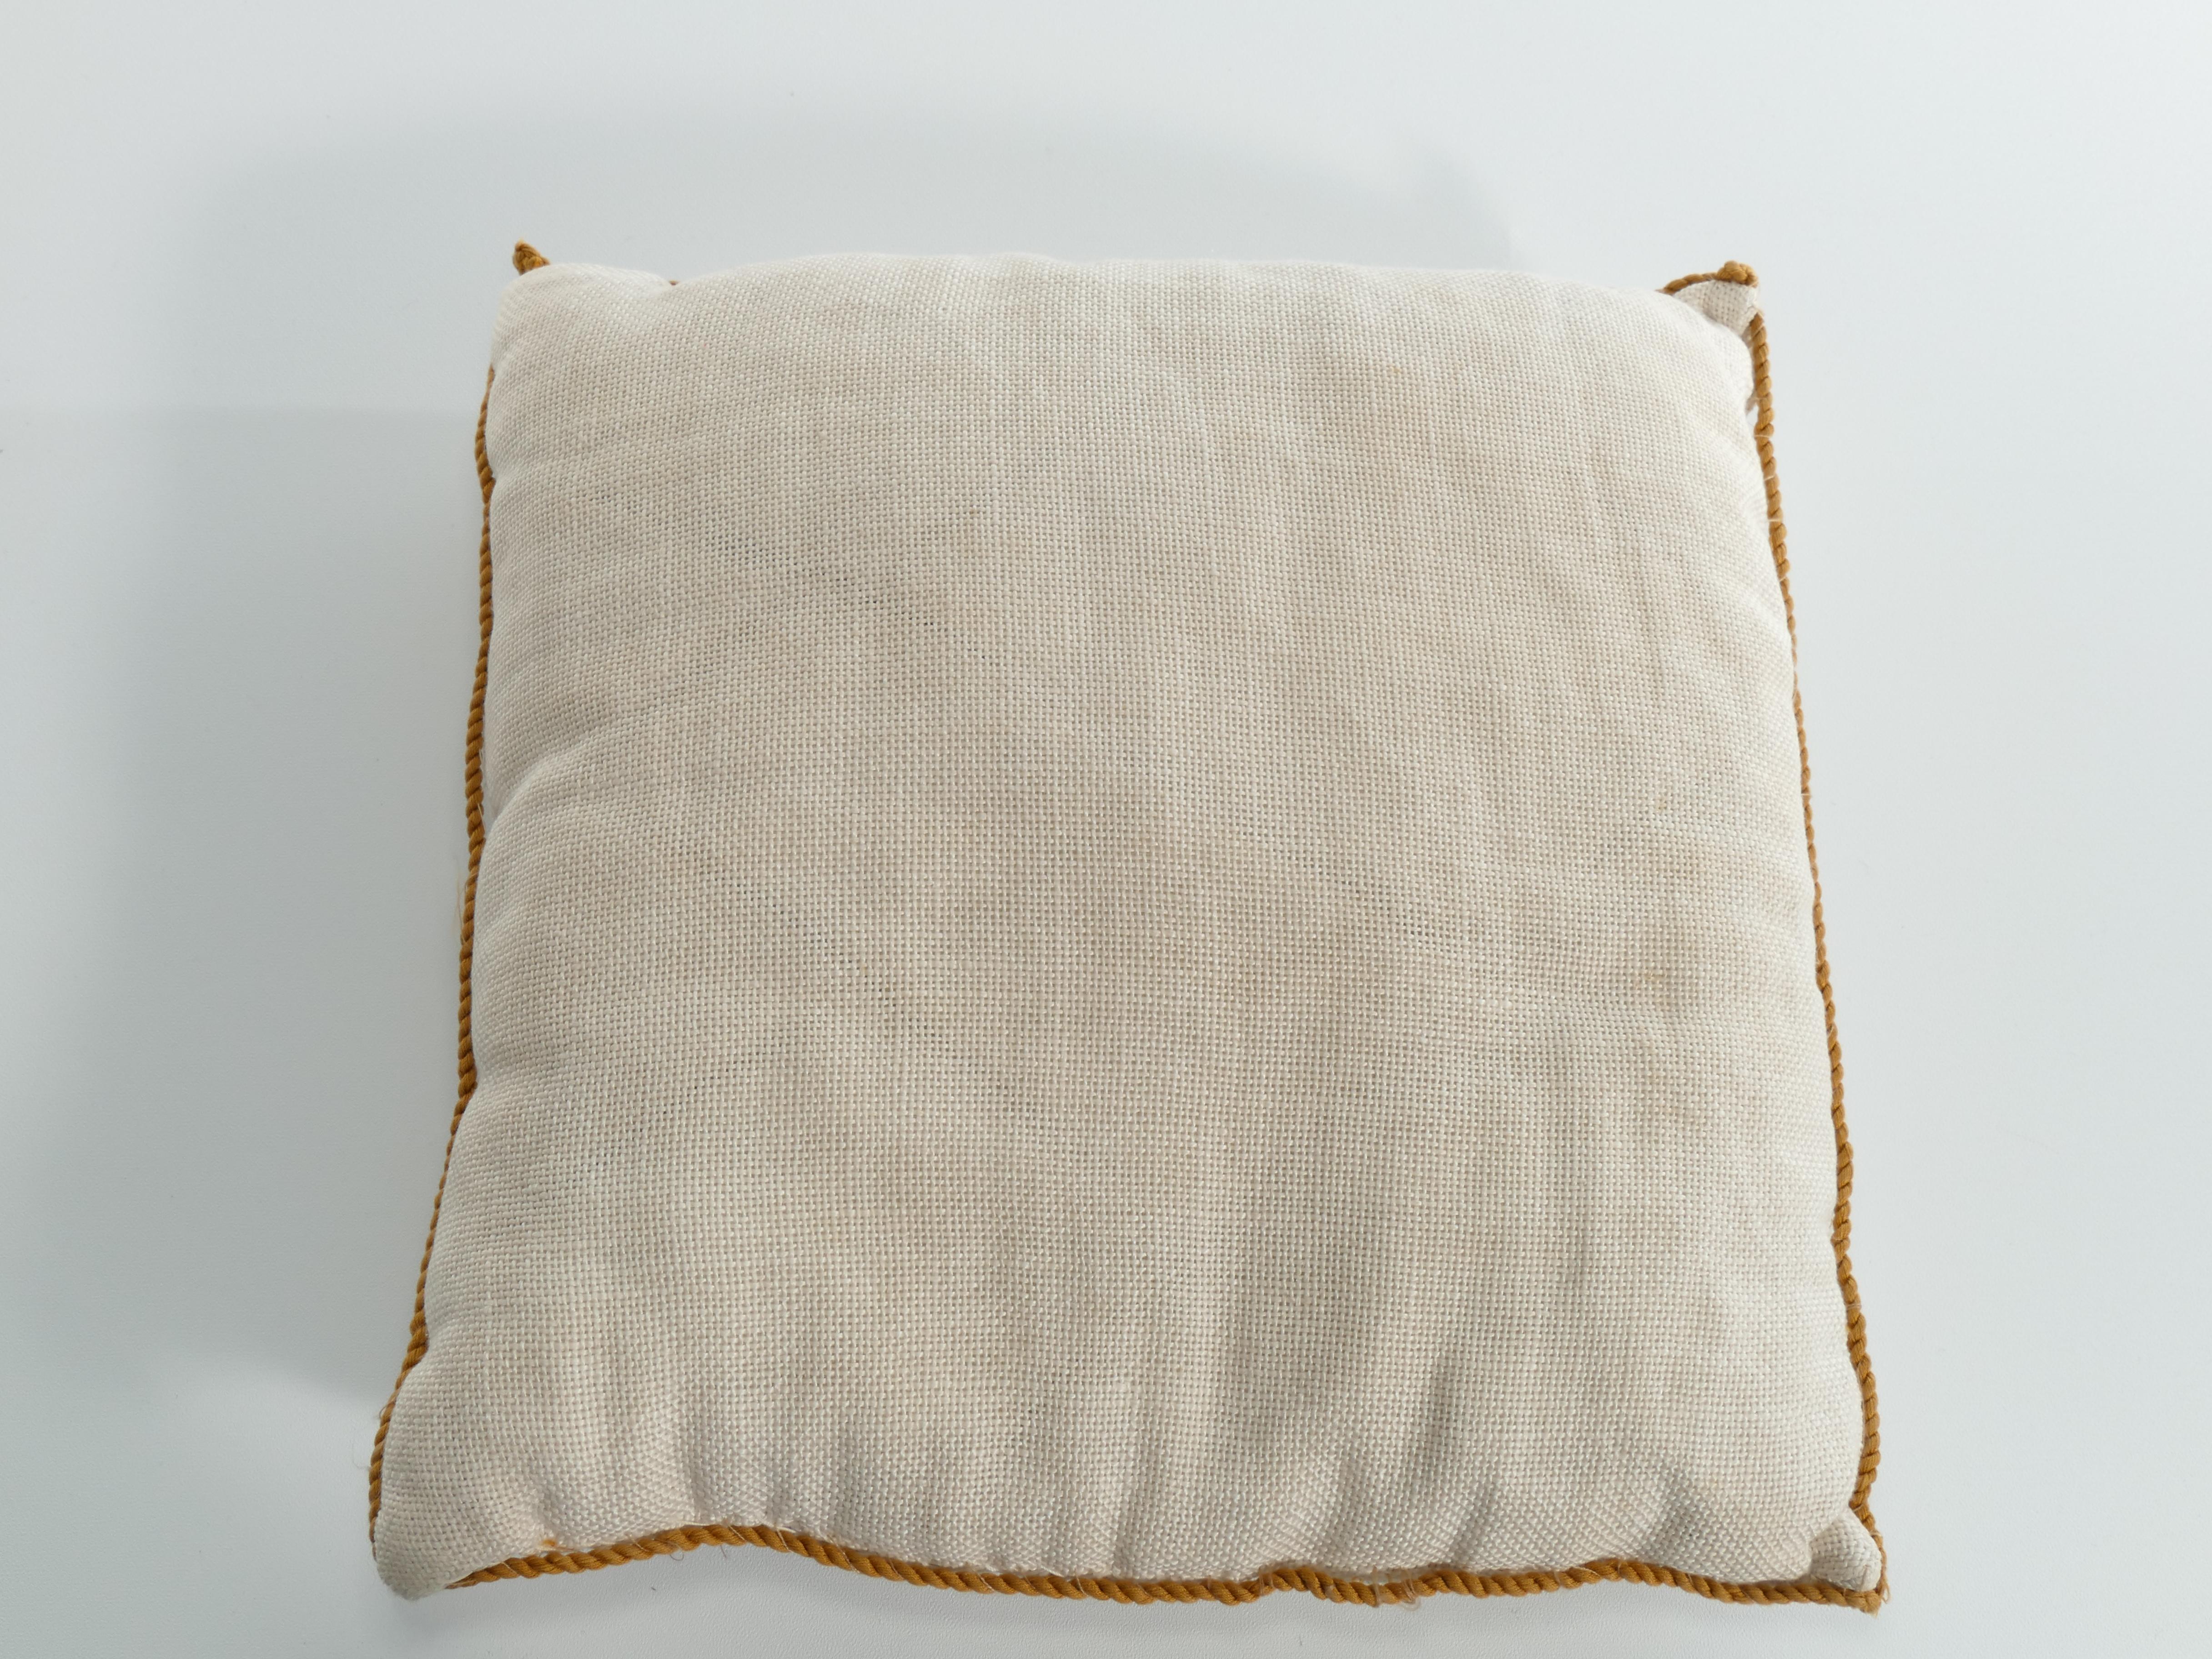 Introducing a Timeless Scandinavian Modern Needlework decorative pillow from the 1950s.
Elevate your space with a touch of vintage charm and Scandinavian elegance. This exquisite Modern Needlework Pillow hails from Sweden, a true representation of